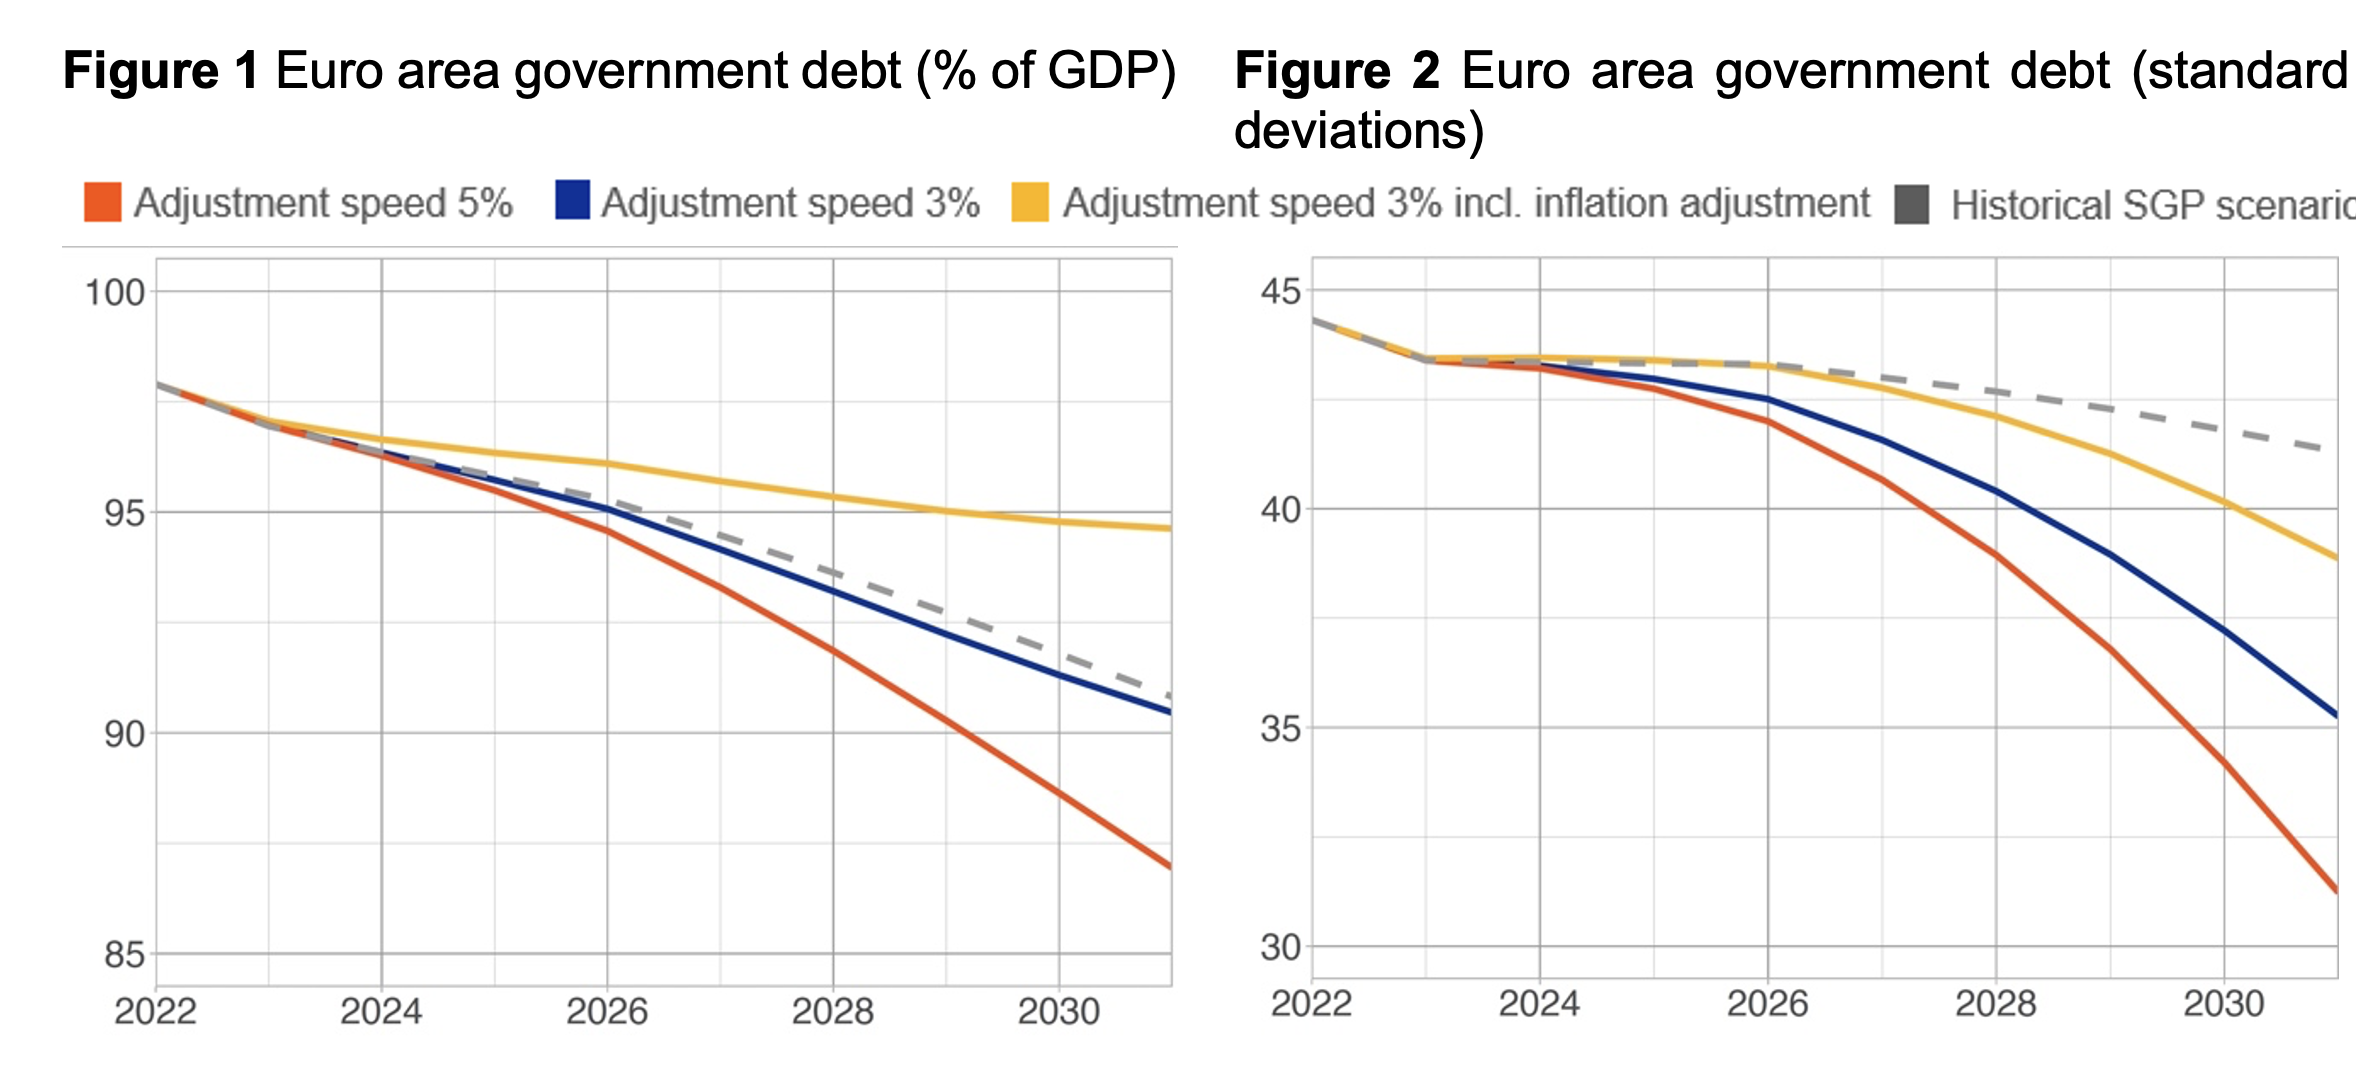 A central bank view of reforming Europe’s fiscal framework 2